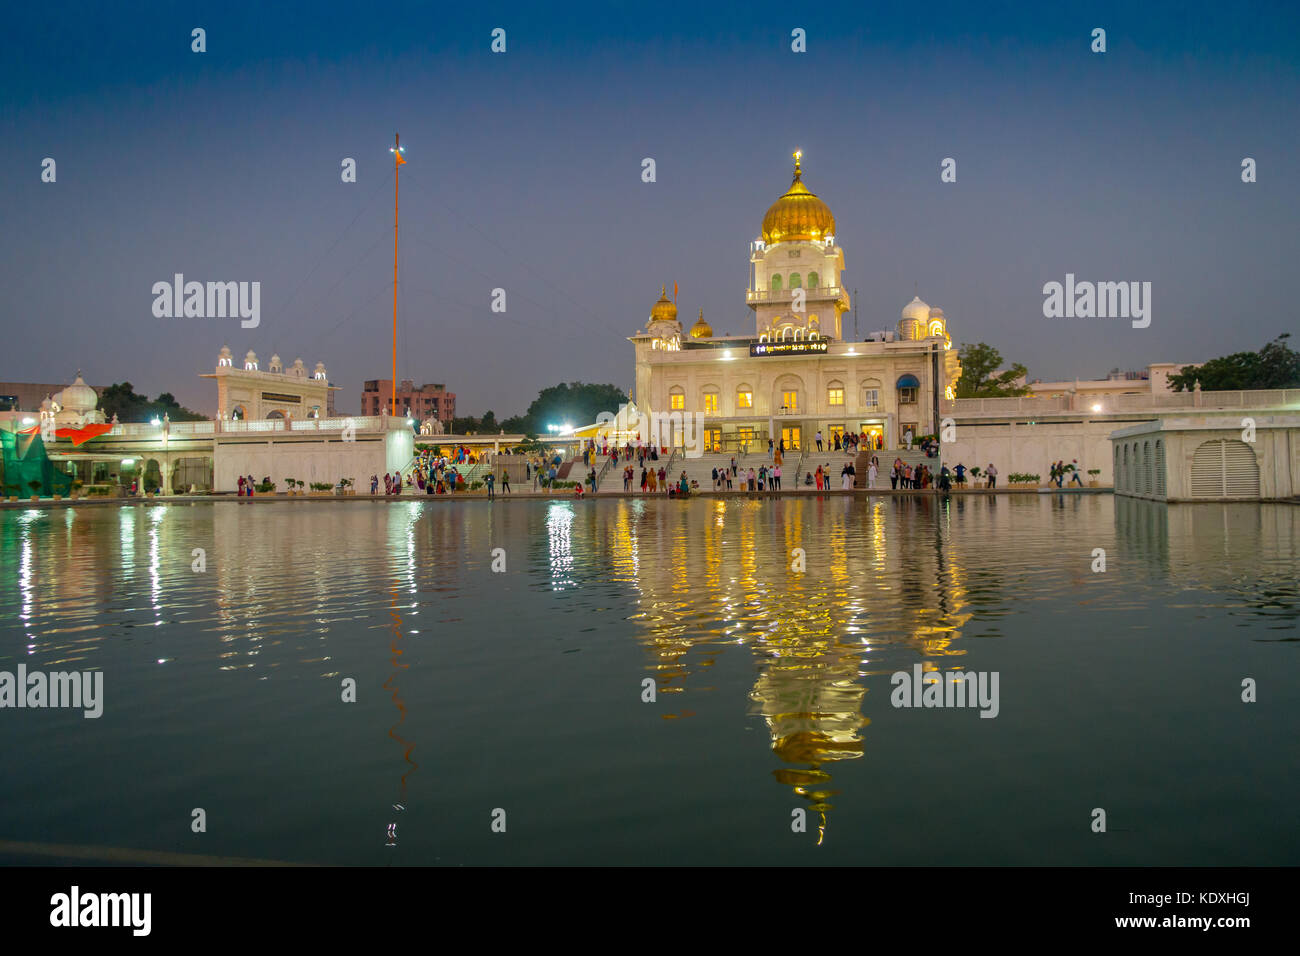 DELHI, INDIA - SEPTEMBER 19, 2017: Unidentified people walking in front of the main Sikh shrines of Delhi - Gurudwara Bangla Sahib. The main building of the temple is illuminated and is reflected in Sarowar pond water in India. Stock Photo